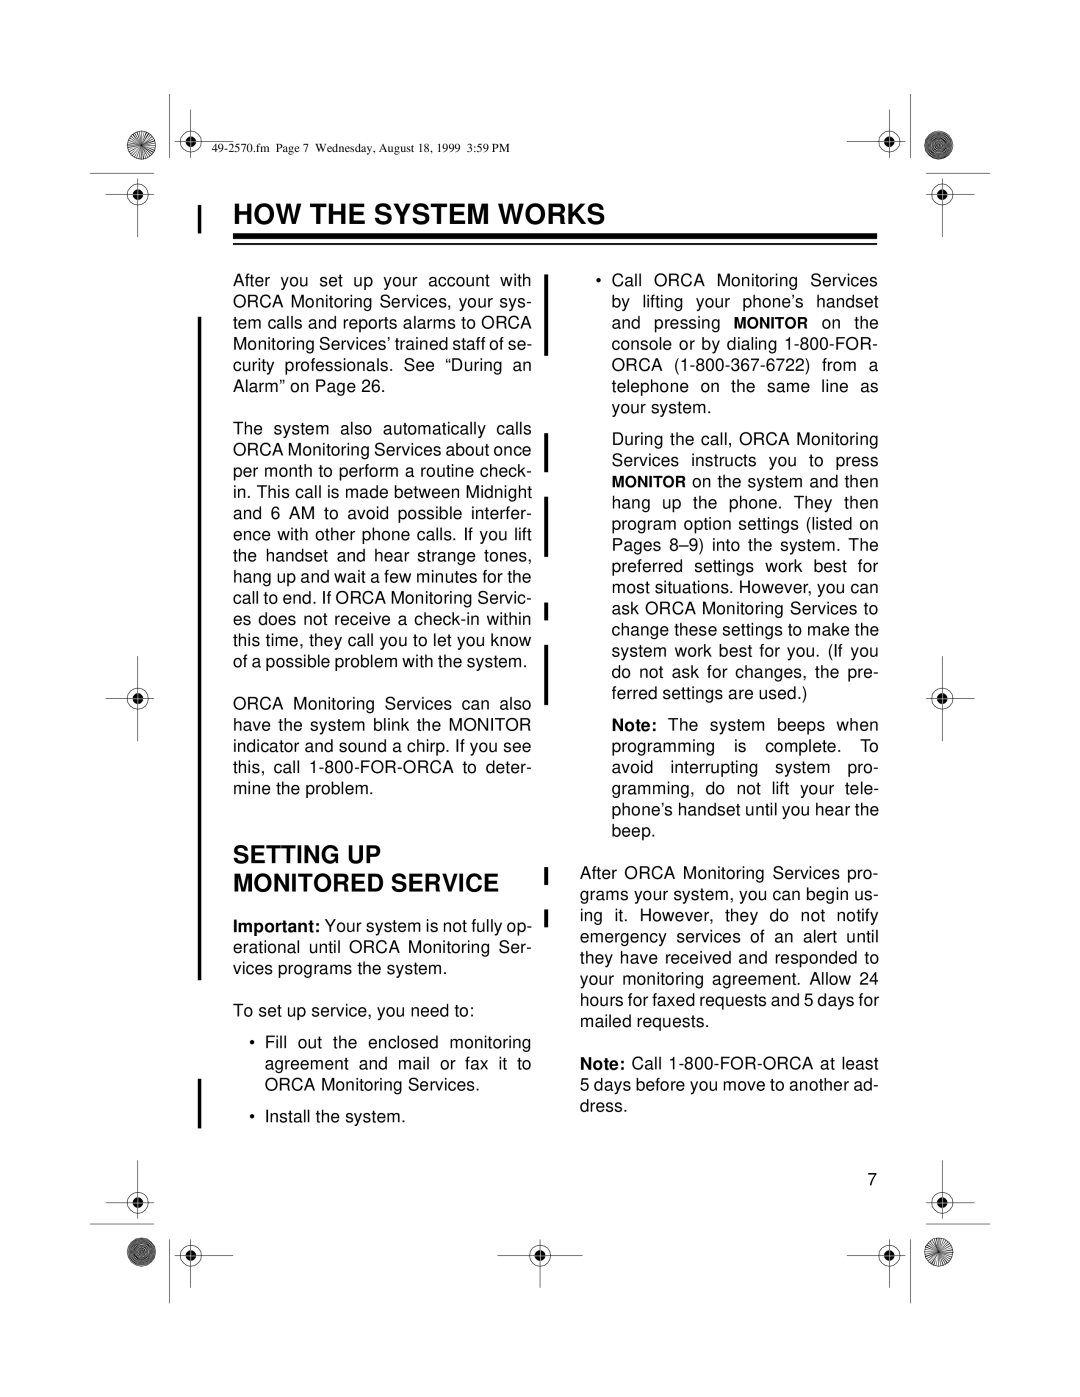 Radio Shack 49-2570 owner manual How The System Works, Setting Up Monitored Service 